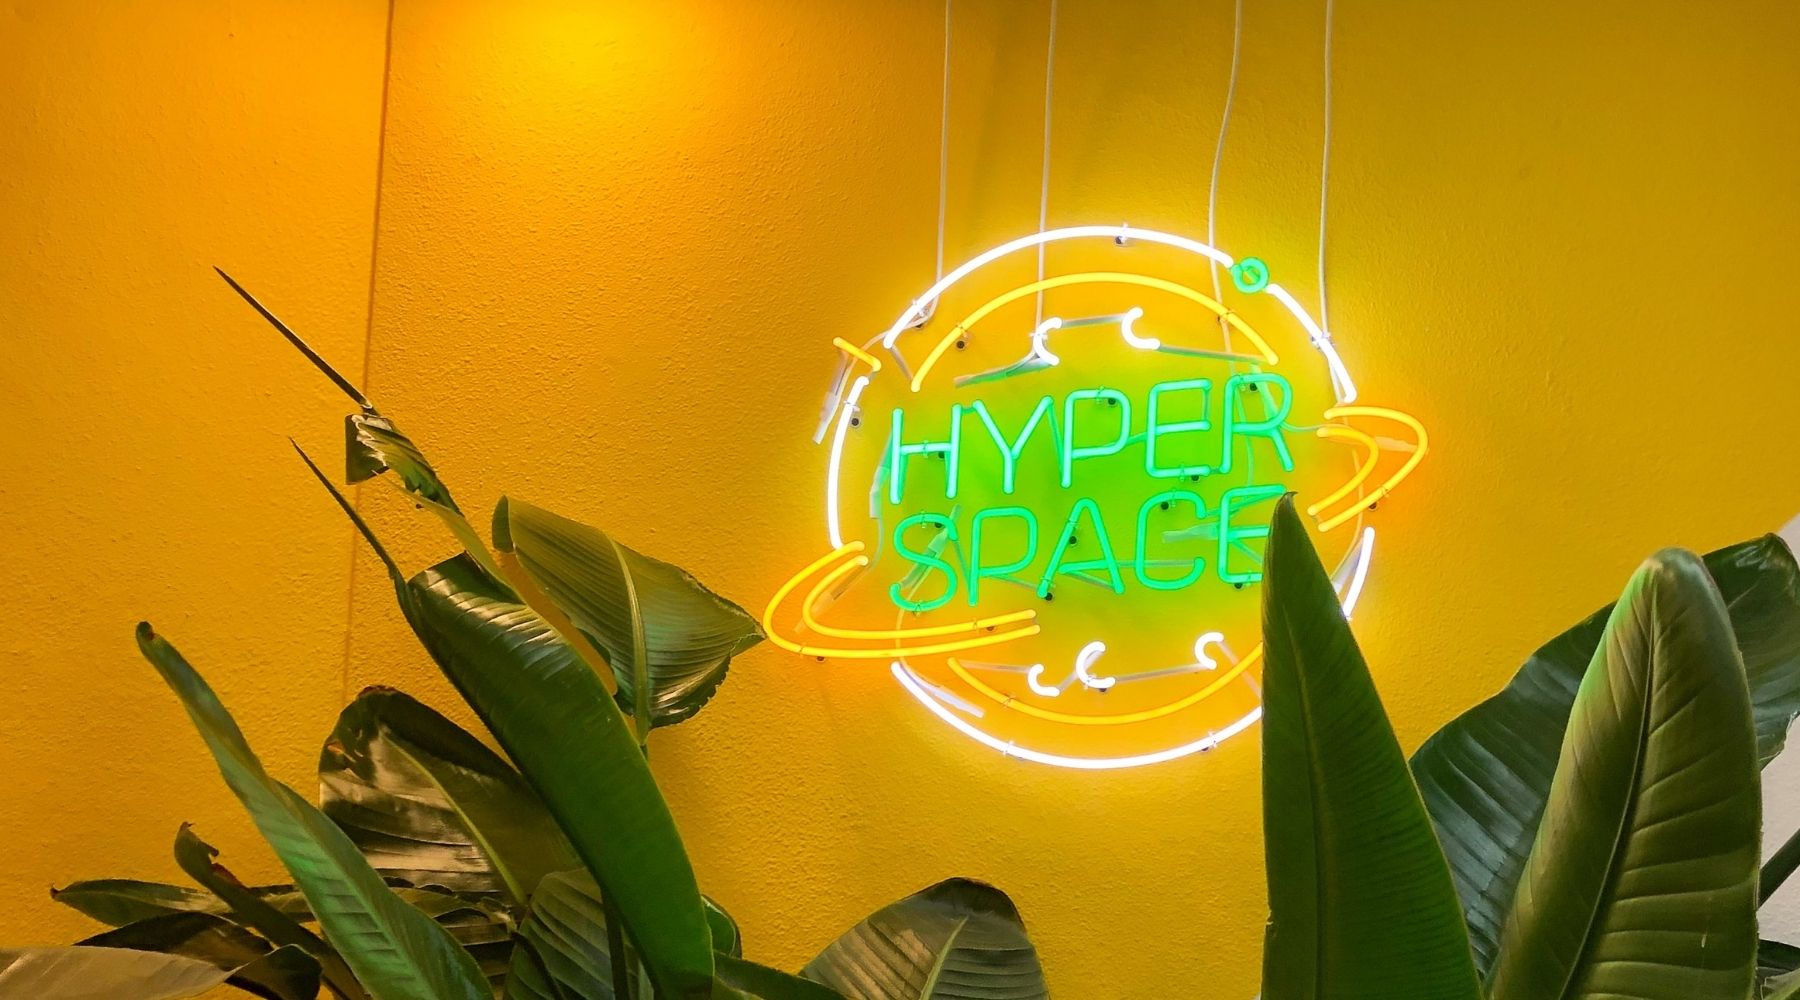 hyperspace neon sign